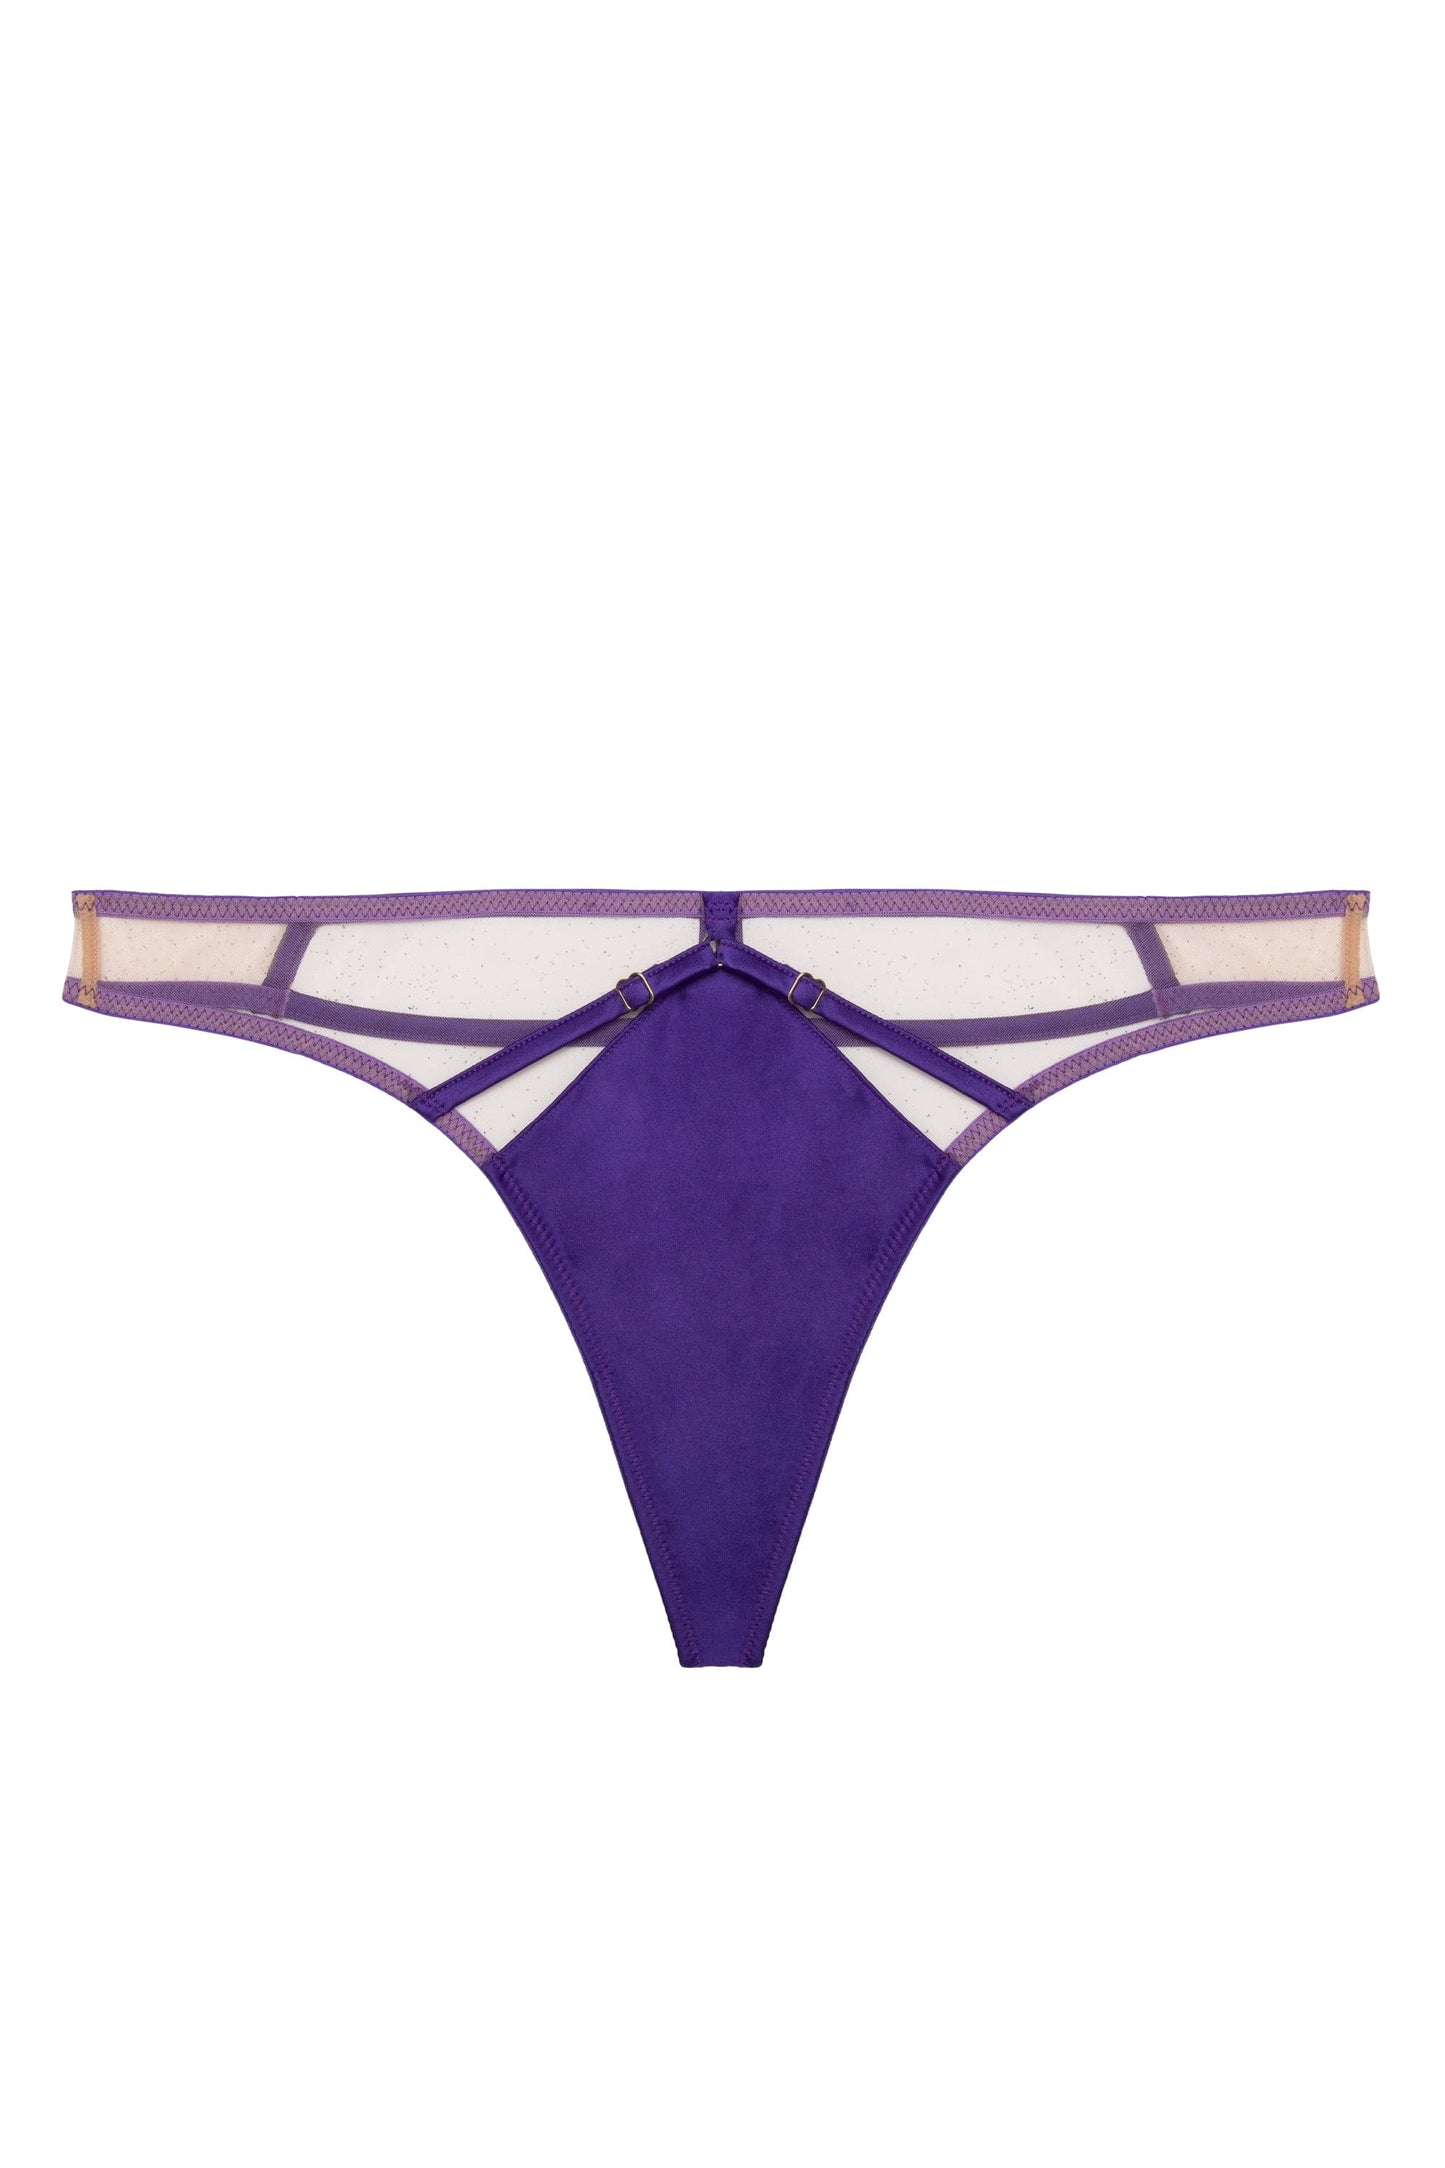 Ramona in Purple Caged Open Back G-string style Thong By Playful Promises - sizes 4-16